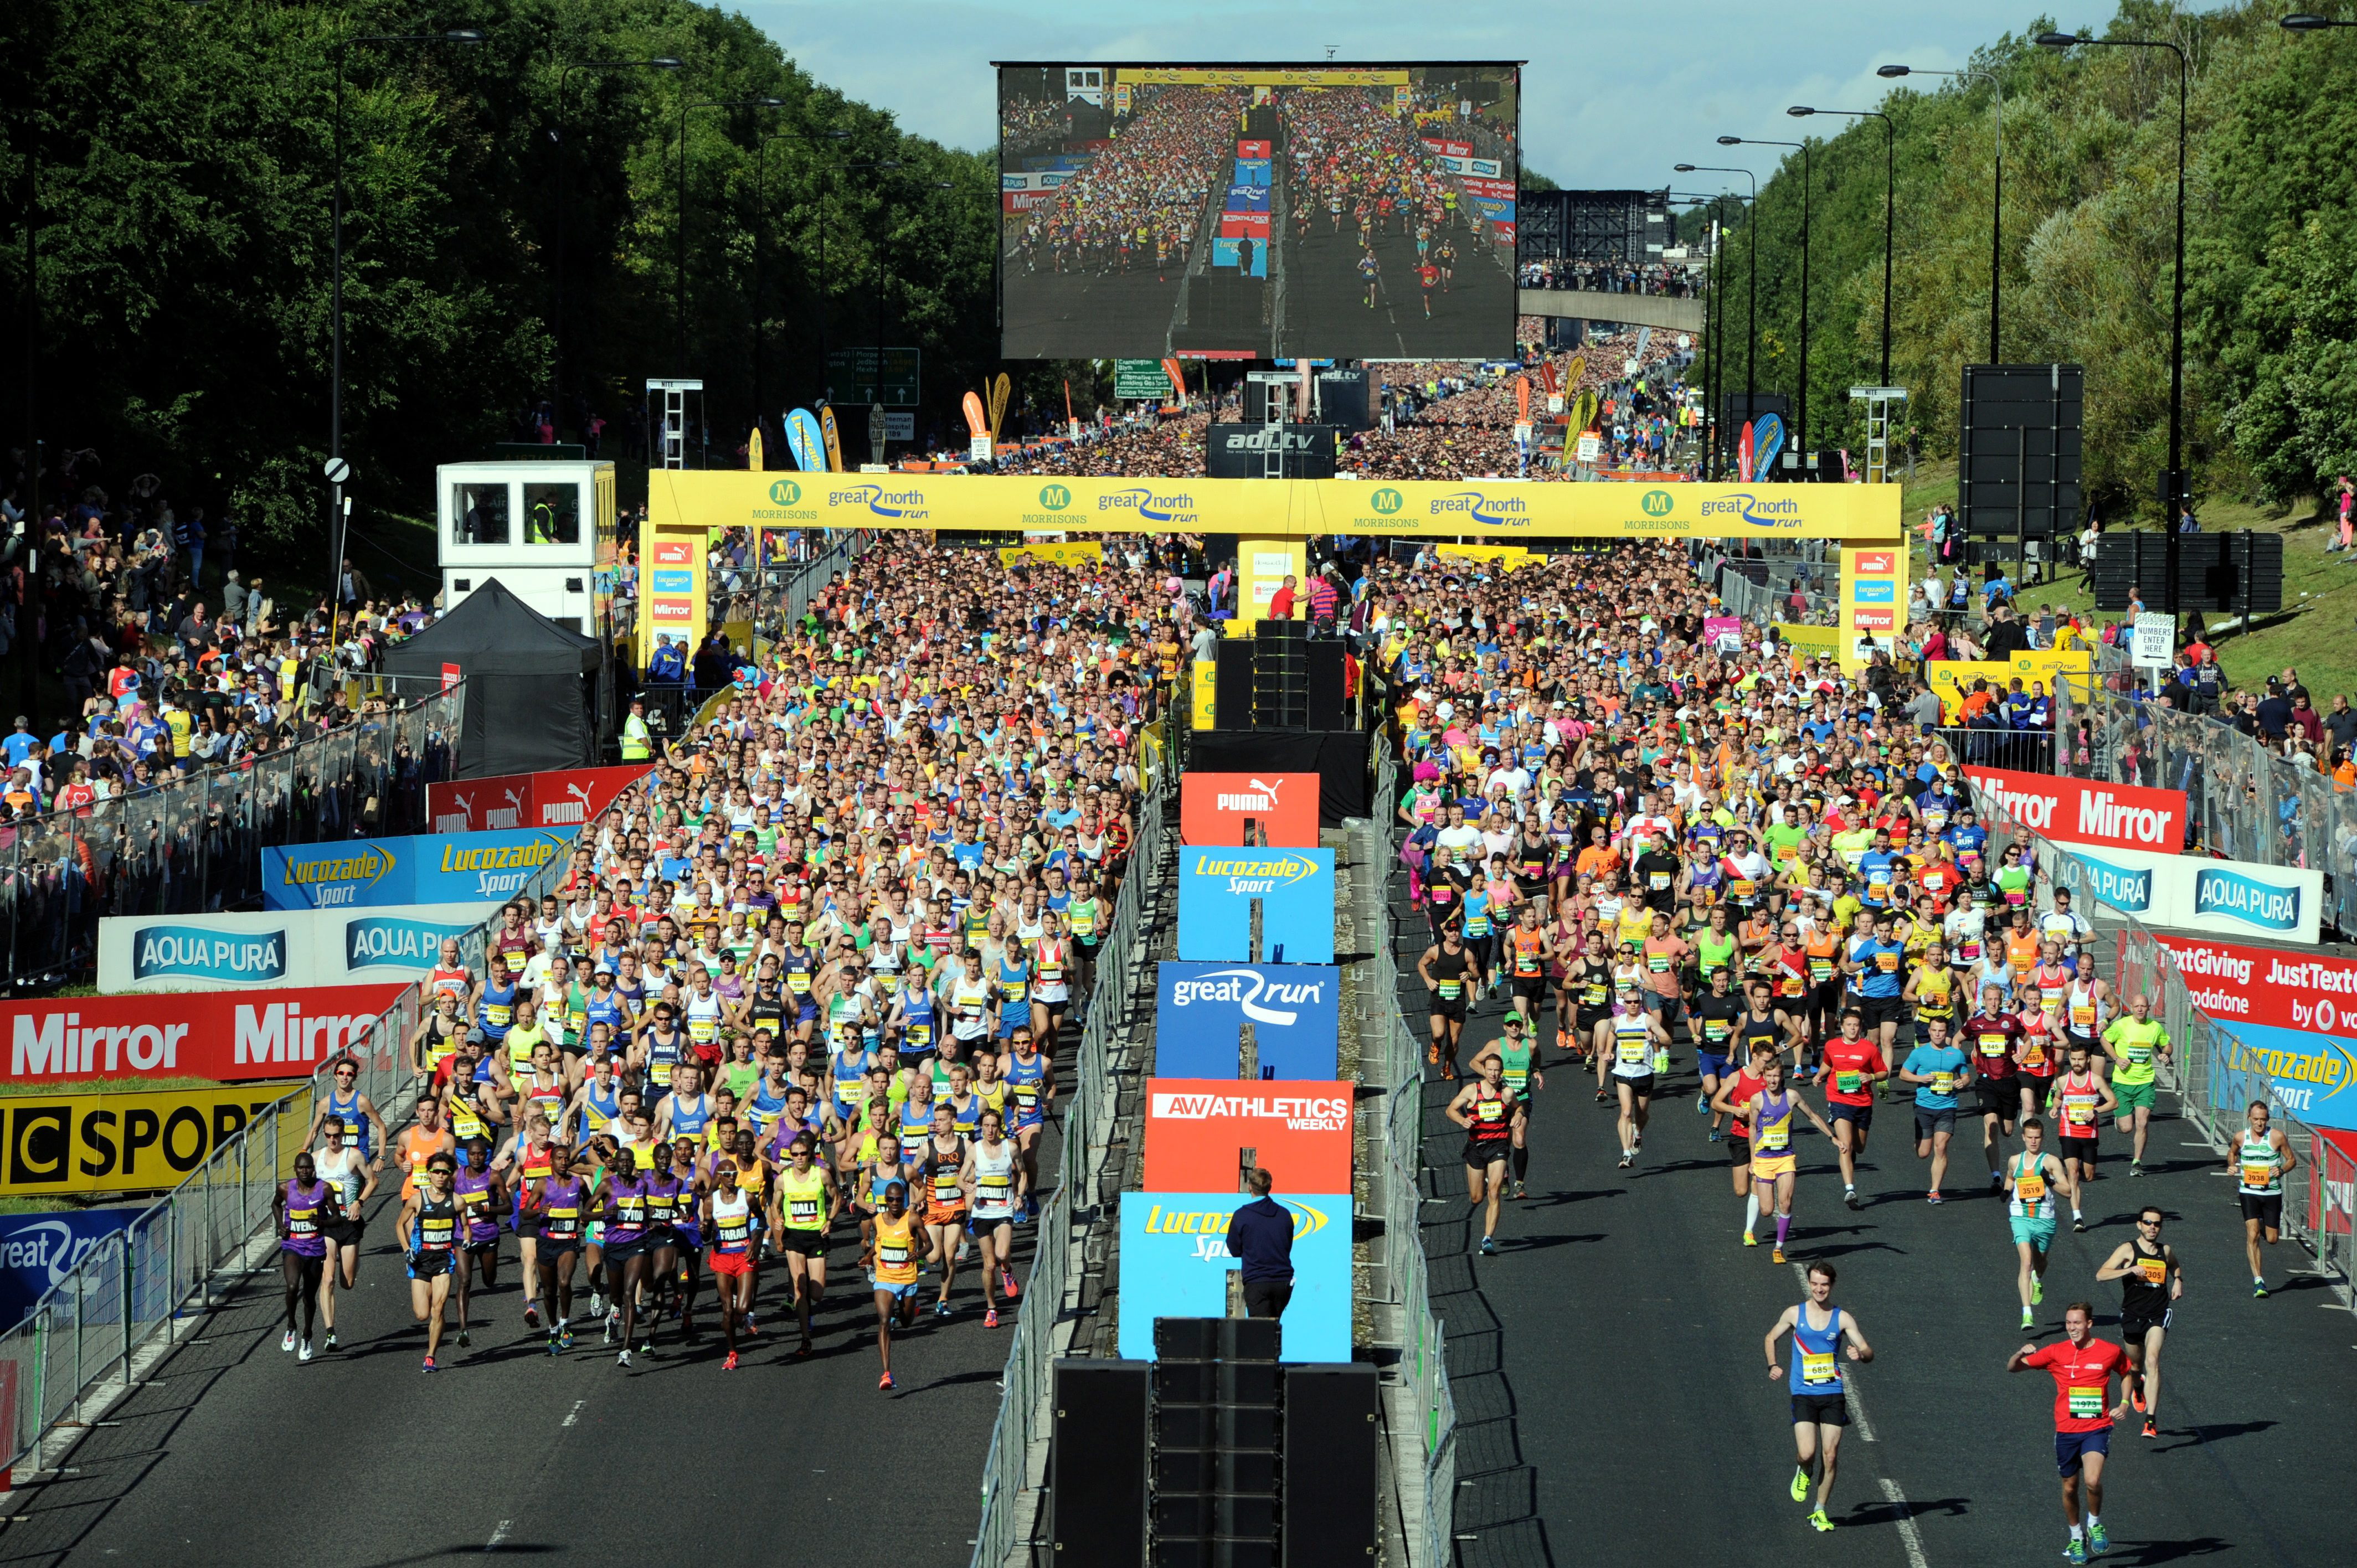 Dated: 13/09/2015 The 35th staging of the Morrisons Great North Run took place today (13 September). 57,000 people registered to take part in Britains biggest running event, a 13.1 mile course from Newcastle to South Shields. #NorthNewsAndPictures/2daymedia